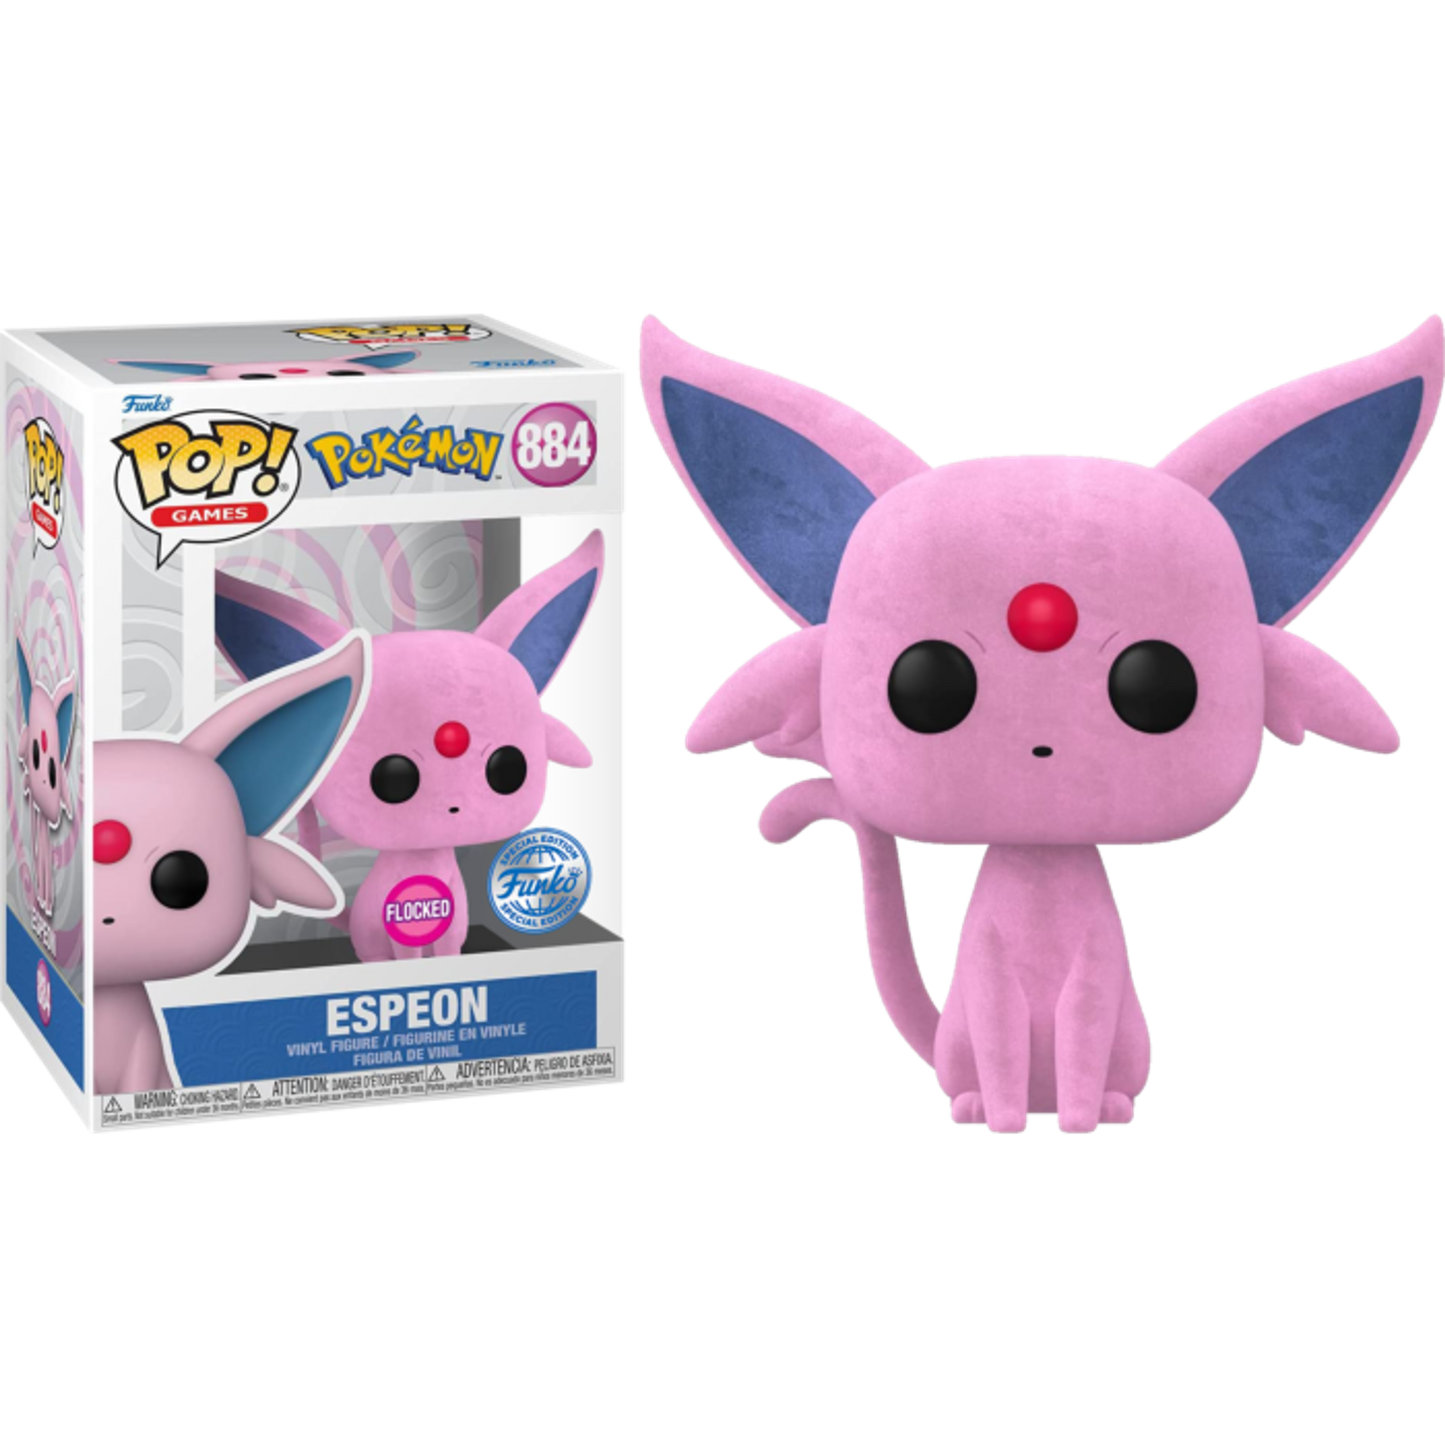 do you know if we will get funko pop pokemon umbreon, espeon, and